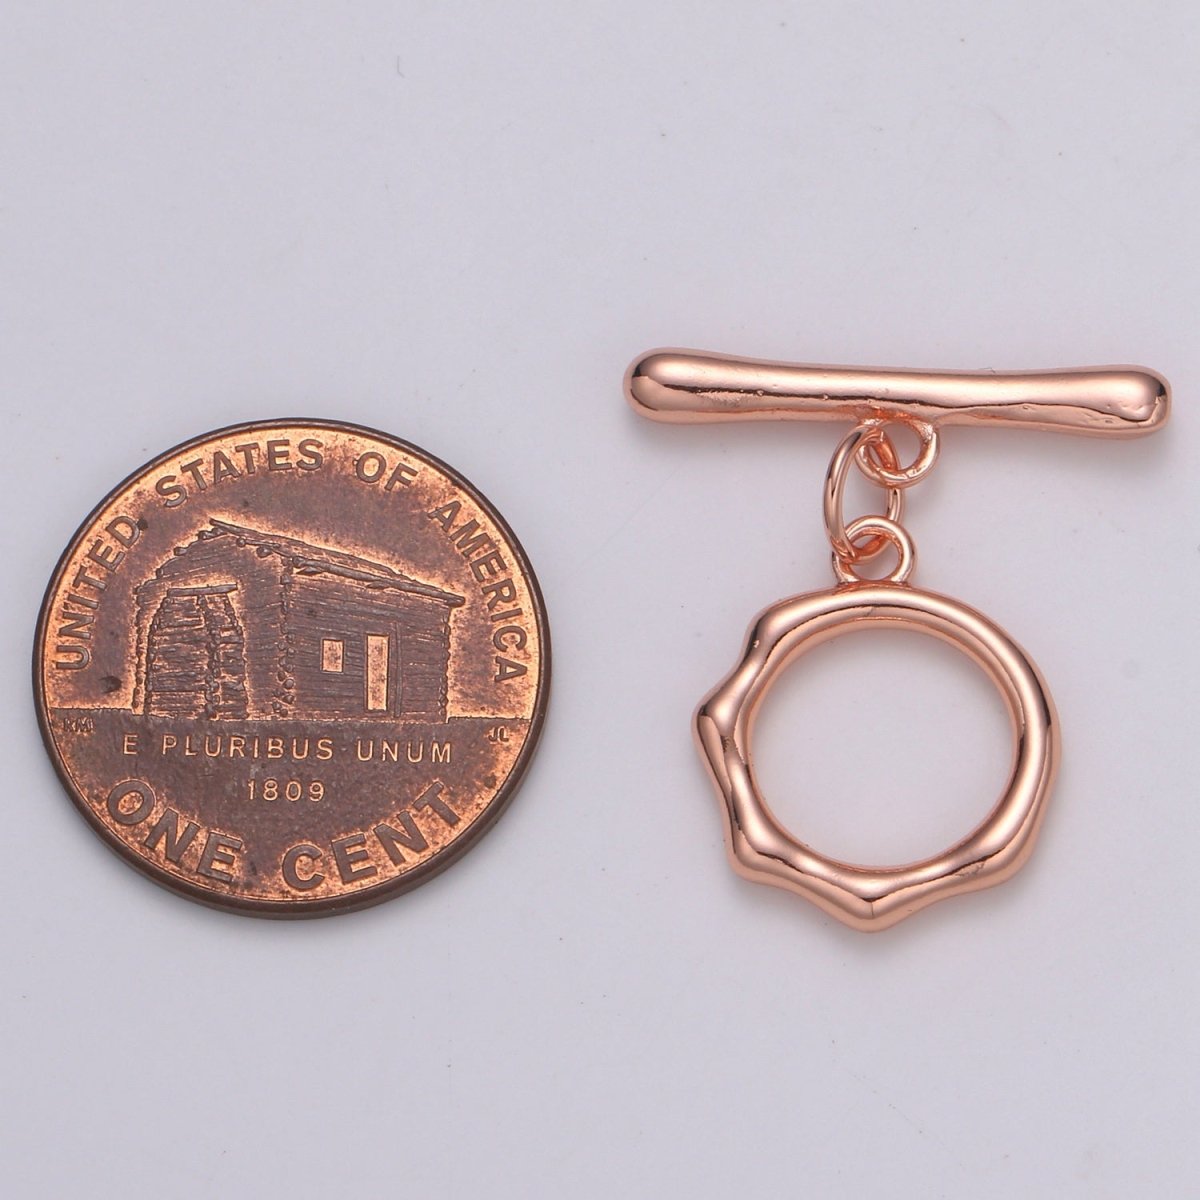 Toggle Clasp with jump ring chose color-Gold, Rose Gold Black, Silver OT Clasp for Jewelry Making Supply L-305~L-308 - DLUXCA